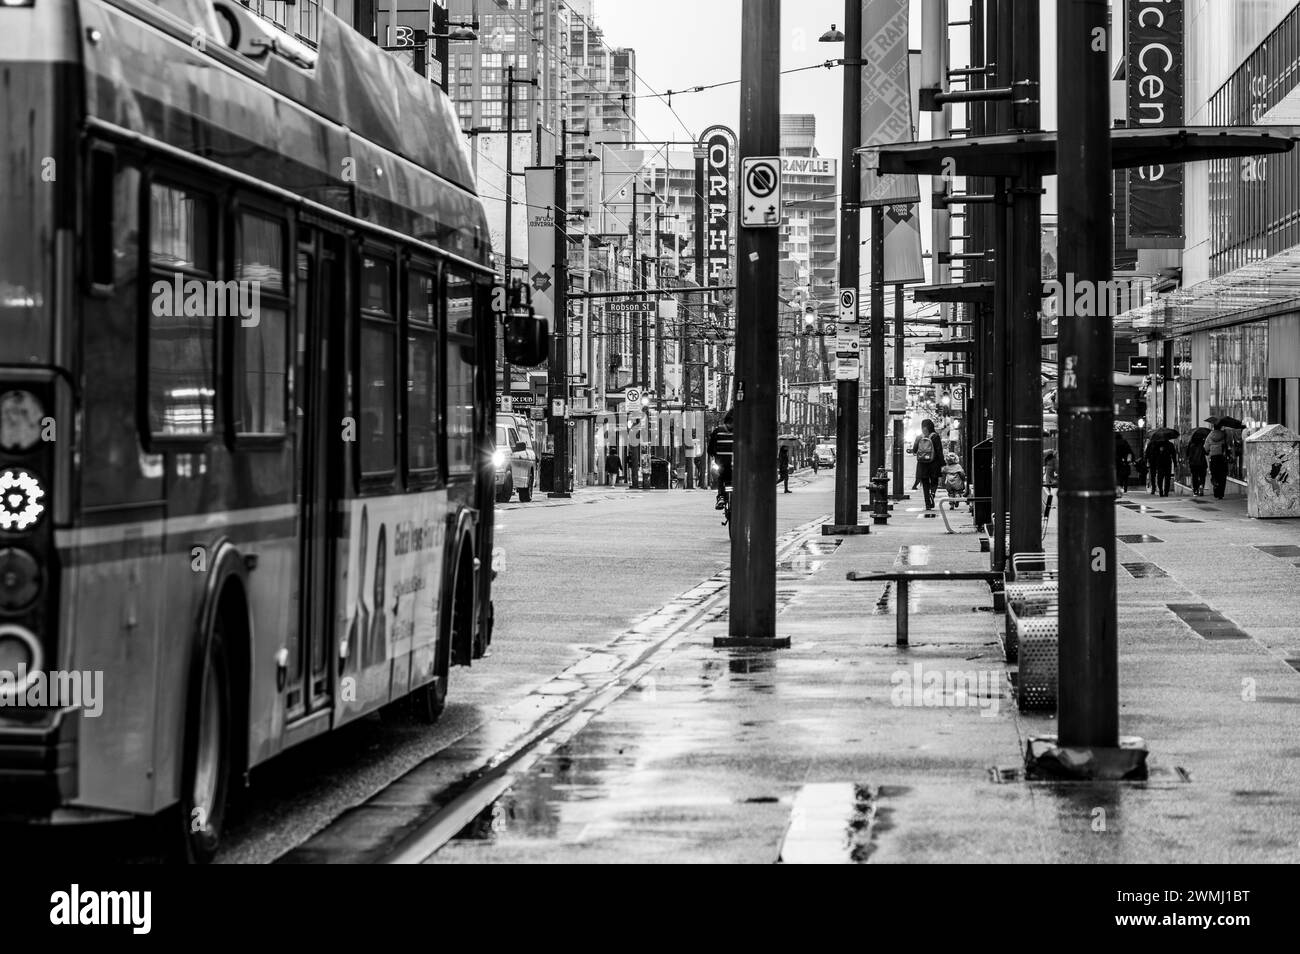 A black and white photo of a TransLink bus going down Granville street on a rainy day with people walking on the sidewalk holding umbrellas. Stock Photo